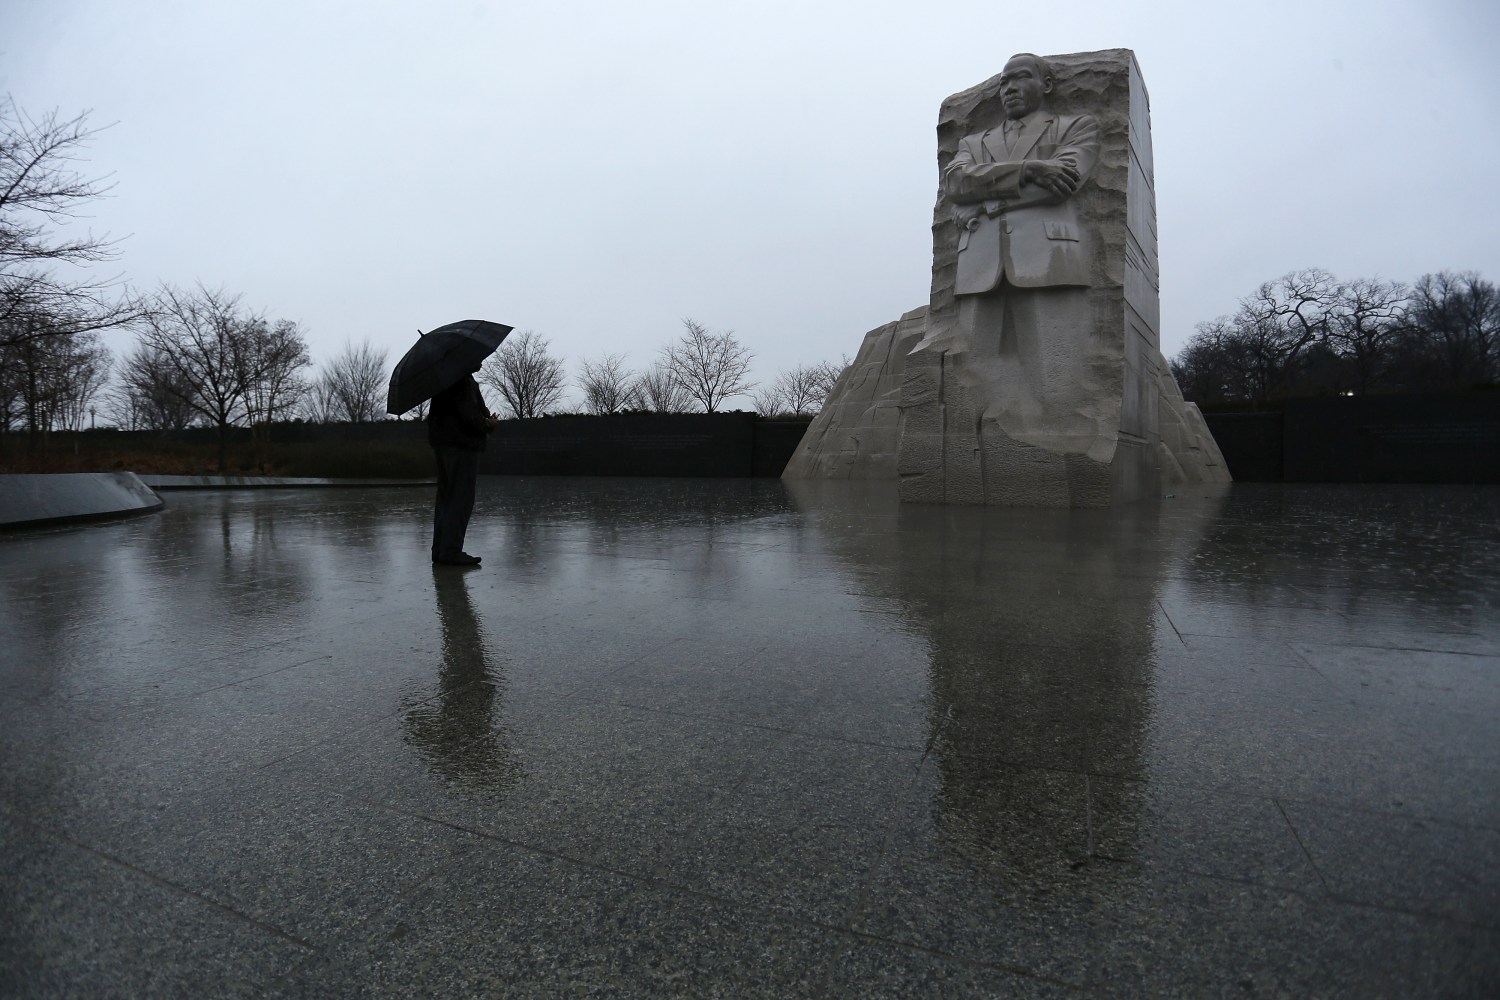 A person stands with an umbrella in a steady rain at the Martin Luther KIng Jr. Memorial in Washington January 18, 2015. REUTERS/Jonathan Ernst